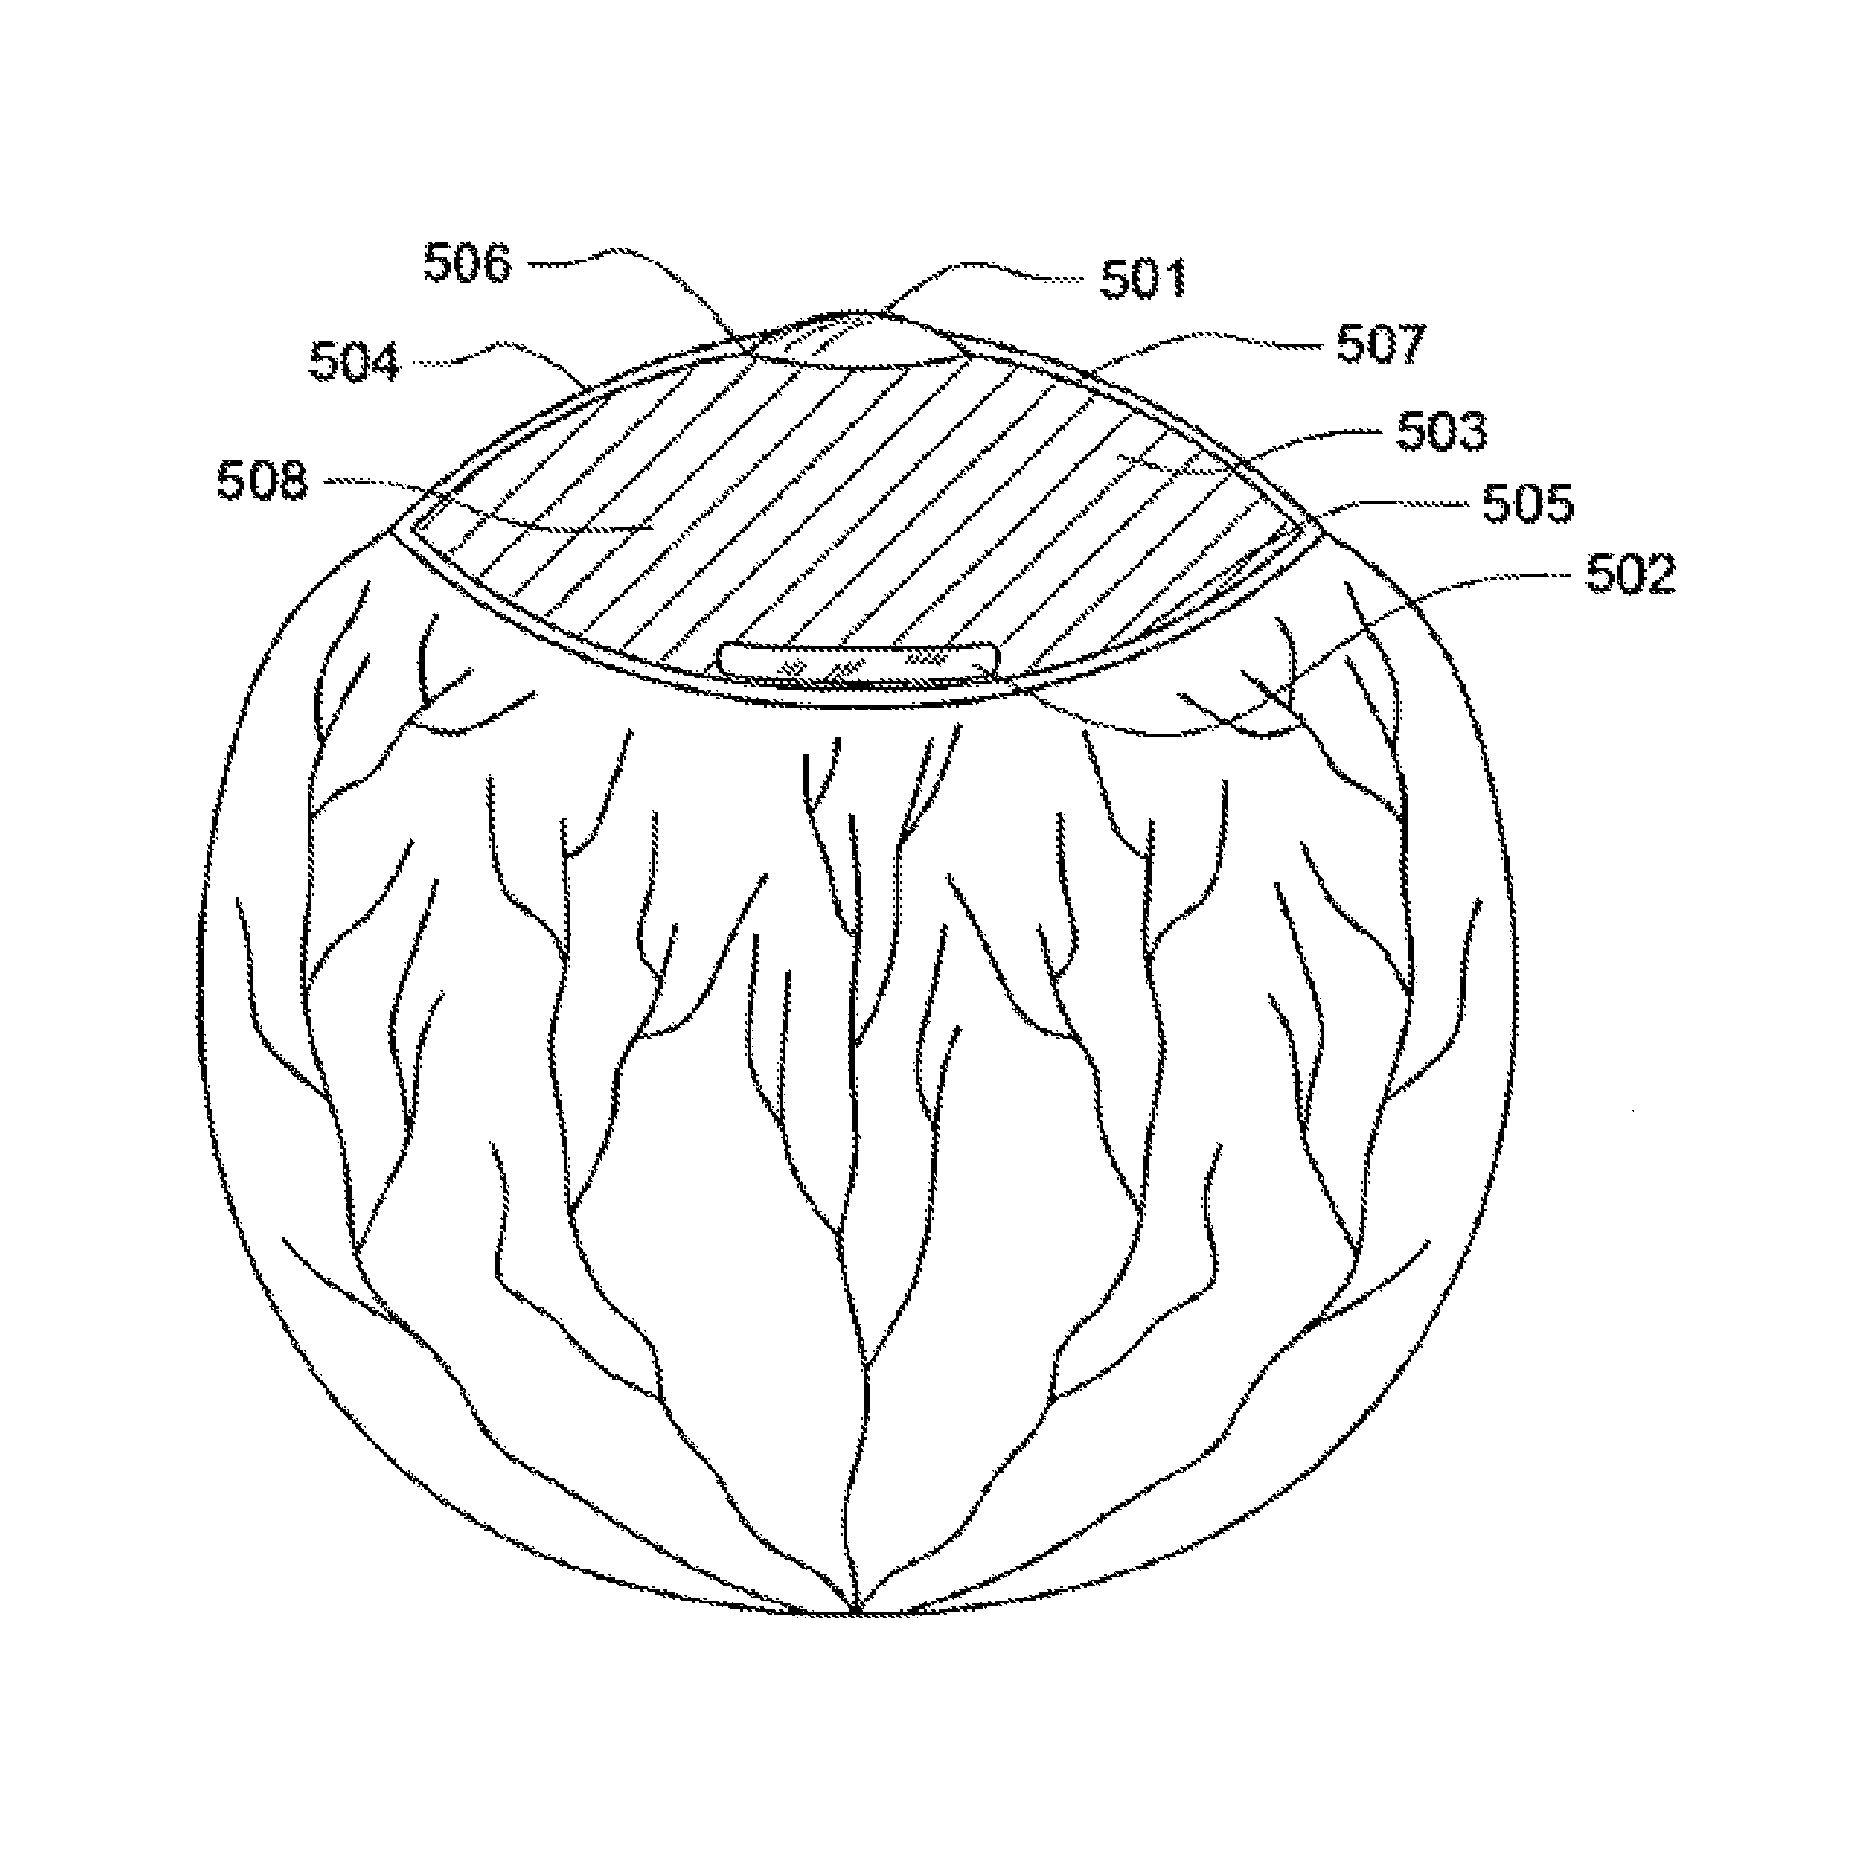 Intraocular lens system with injectable accommodation material